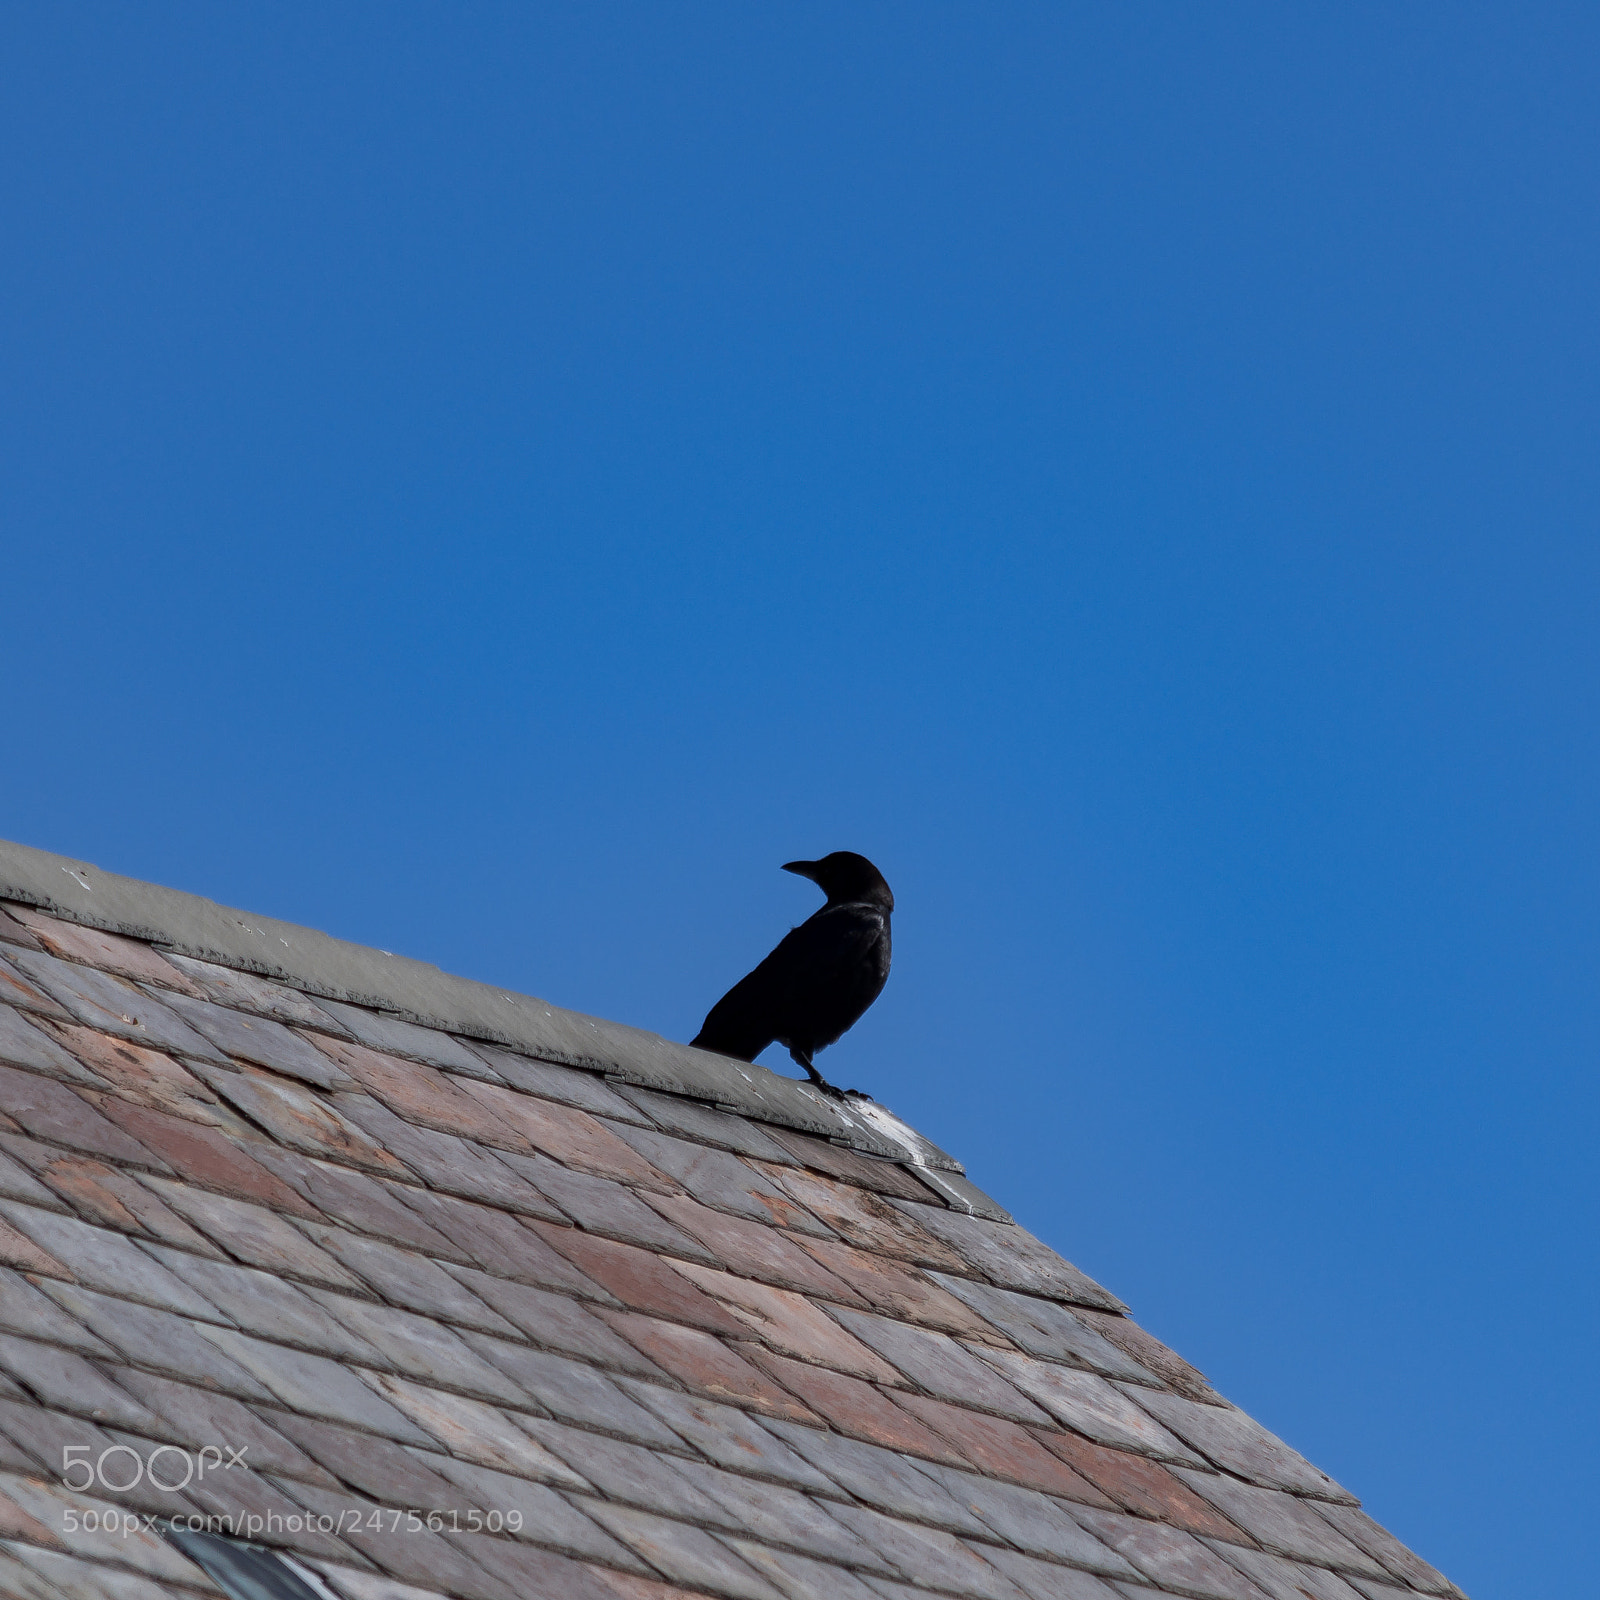 Nikon D500 sample photo. Sitting on a roof photography